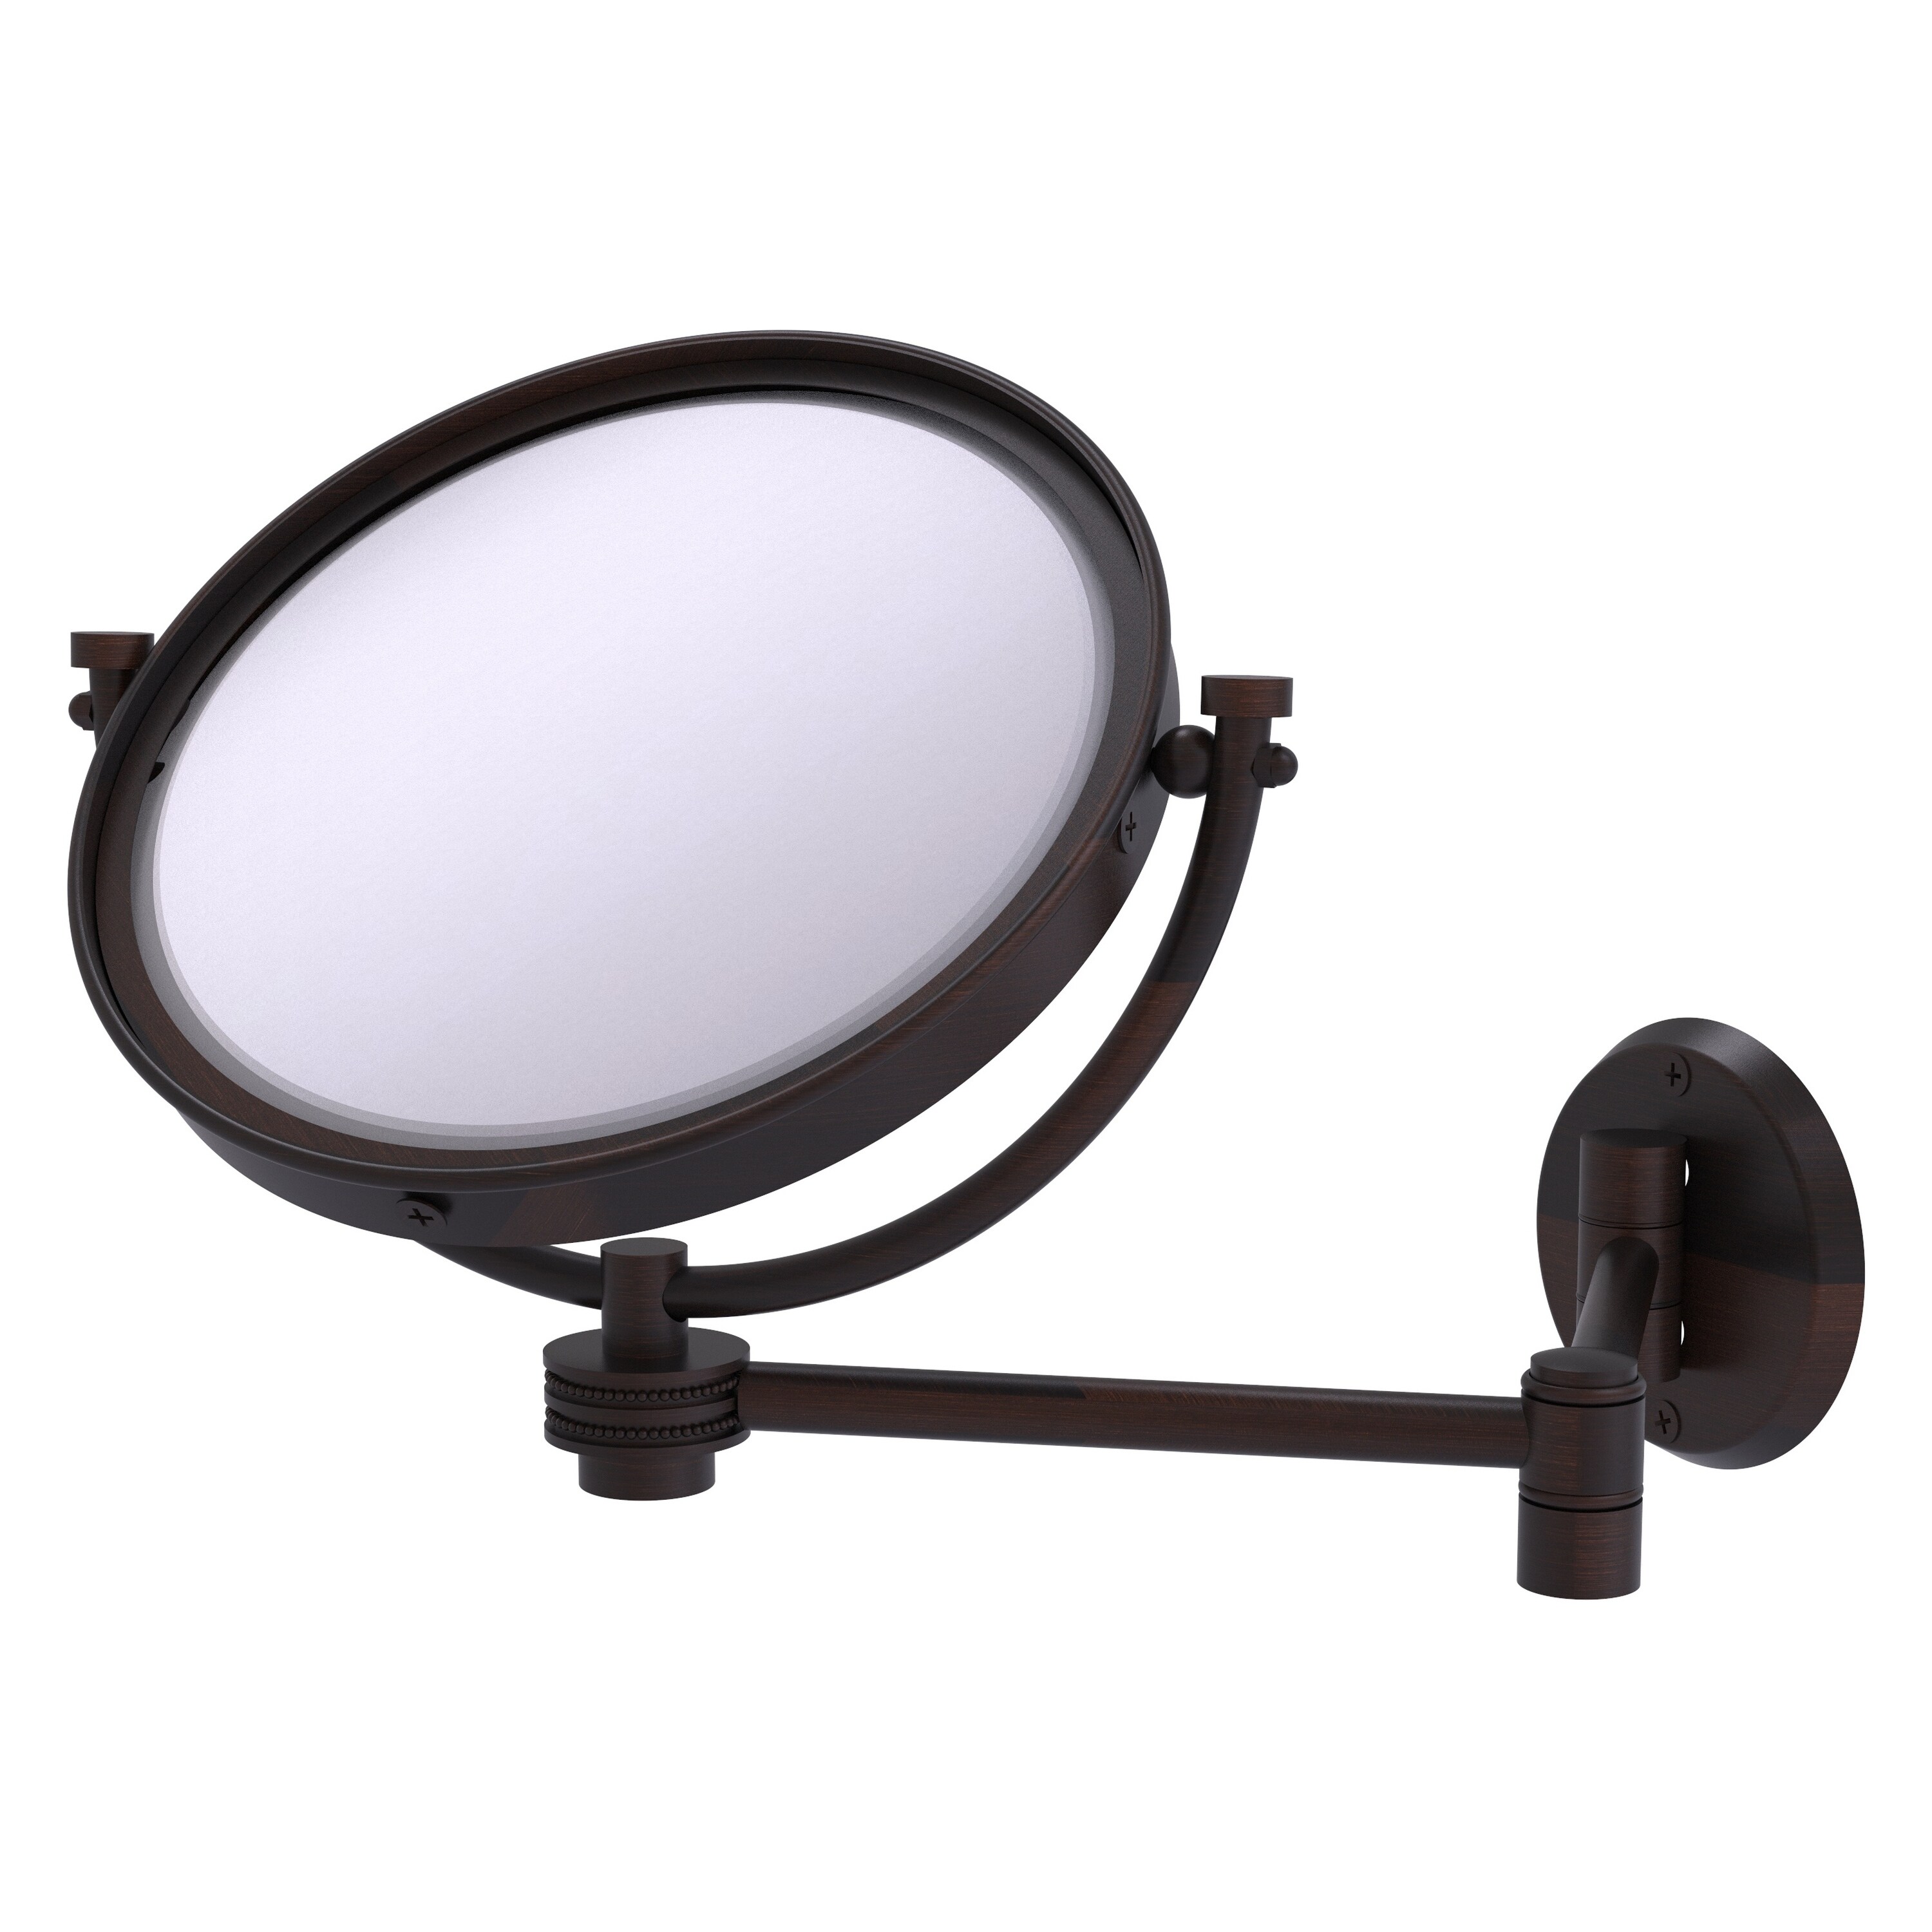 8-in x 10-in Distressed White Double-sided 3X Magnifying Wall-mounted Vanity Mirror | - Allied Brass WM-6D/3X-VB